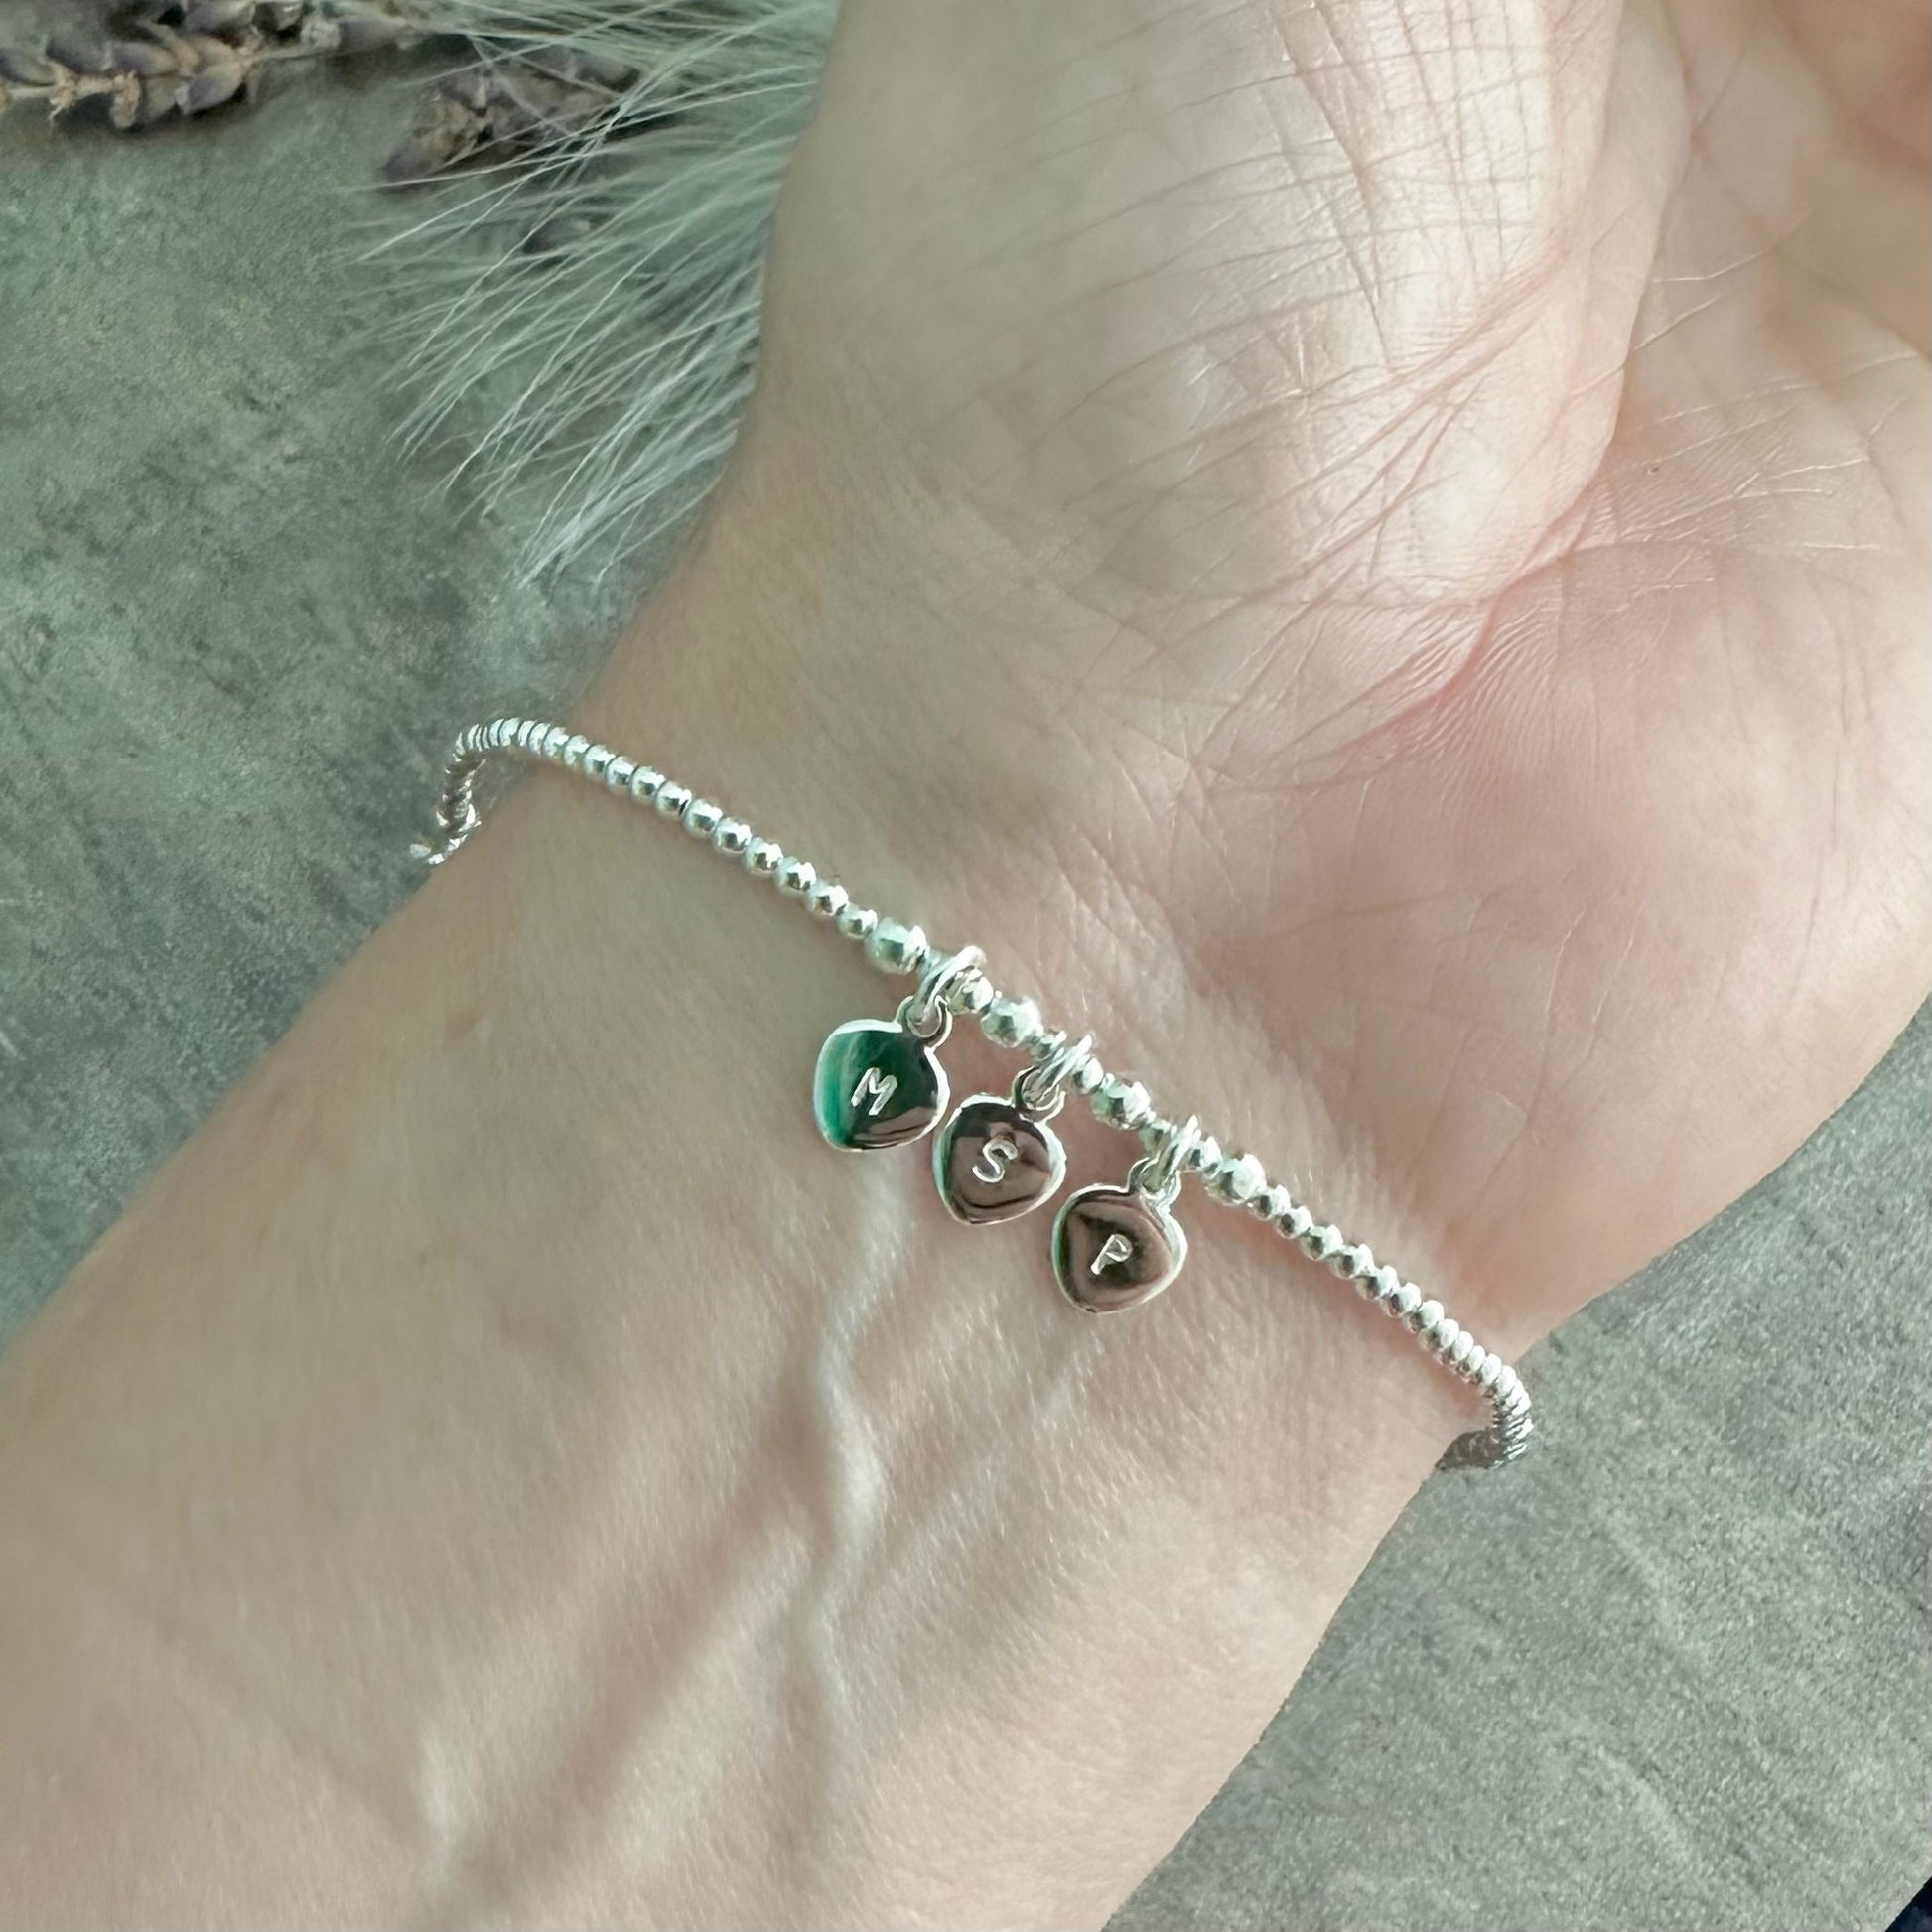 Family Initials Stretch Bracelet in Sterling Silver